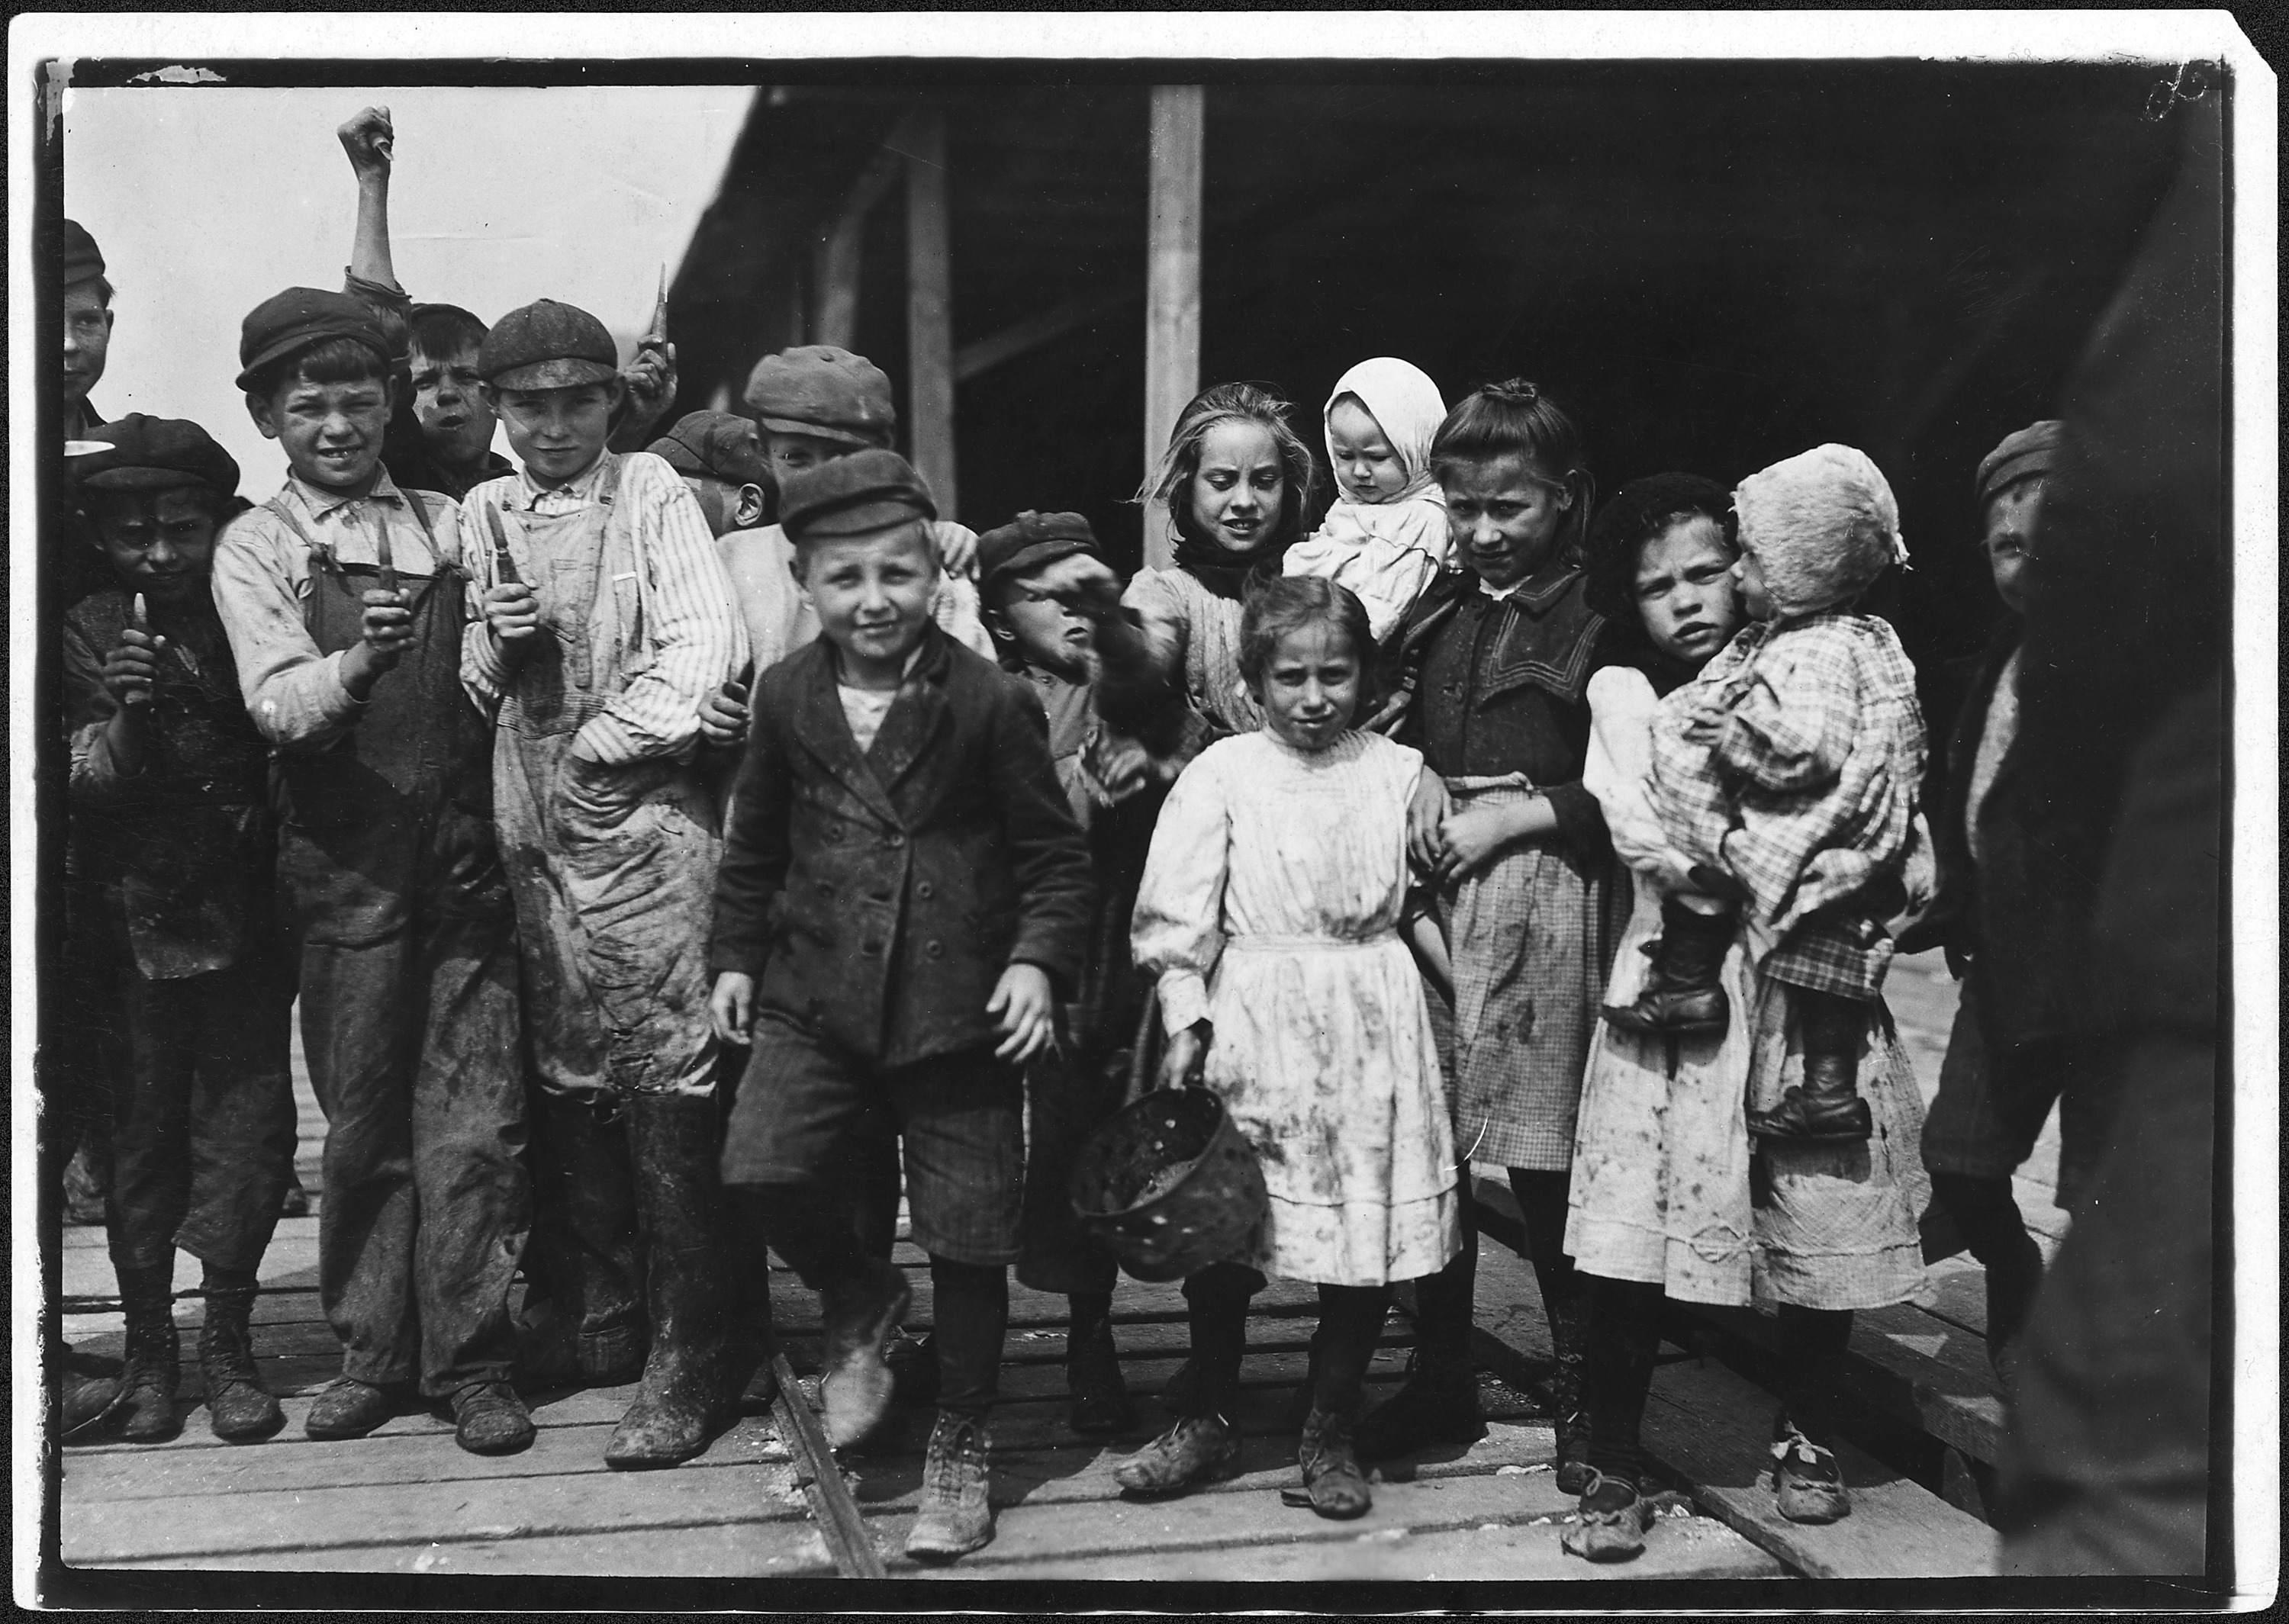 All these children except babies shuck oysters and tend babies at the Pass Packing Co. I saw them all at work there... - NARA - 523405